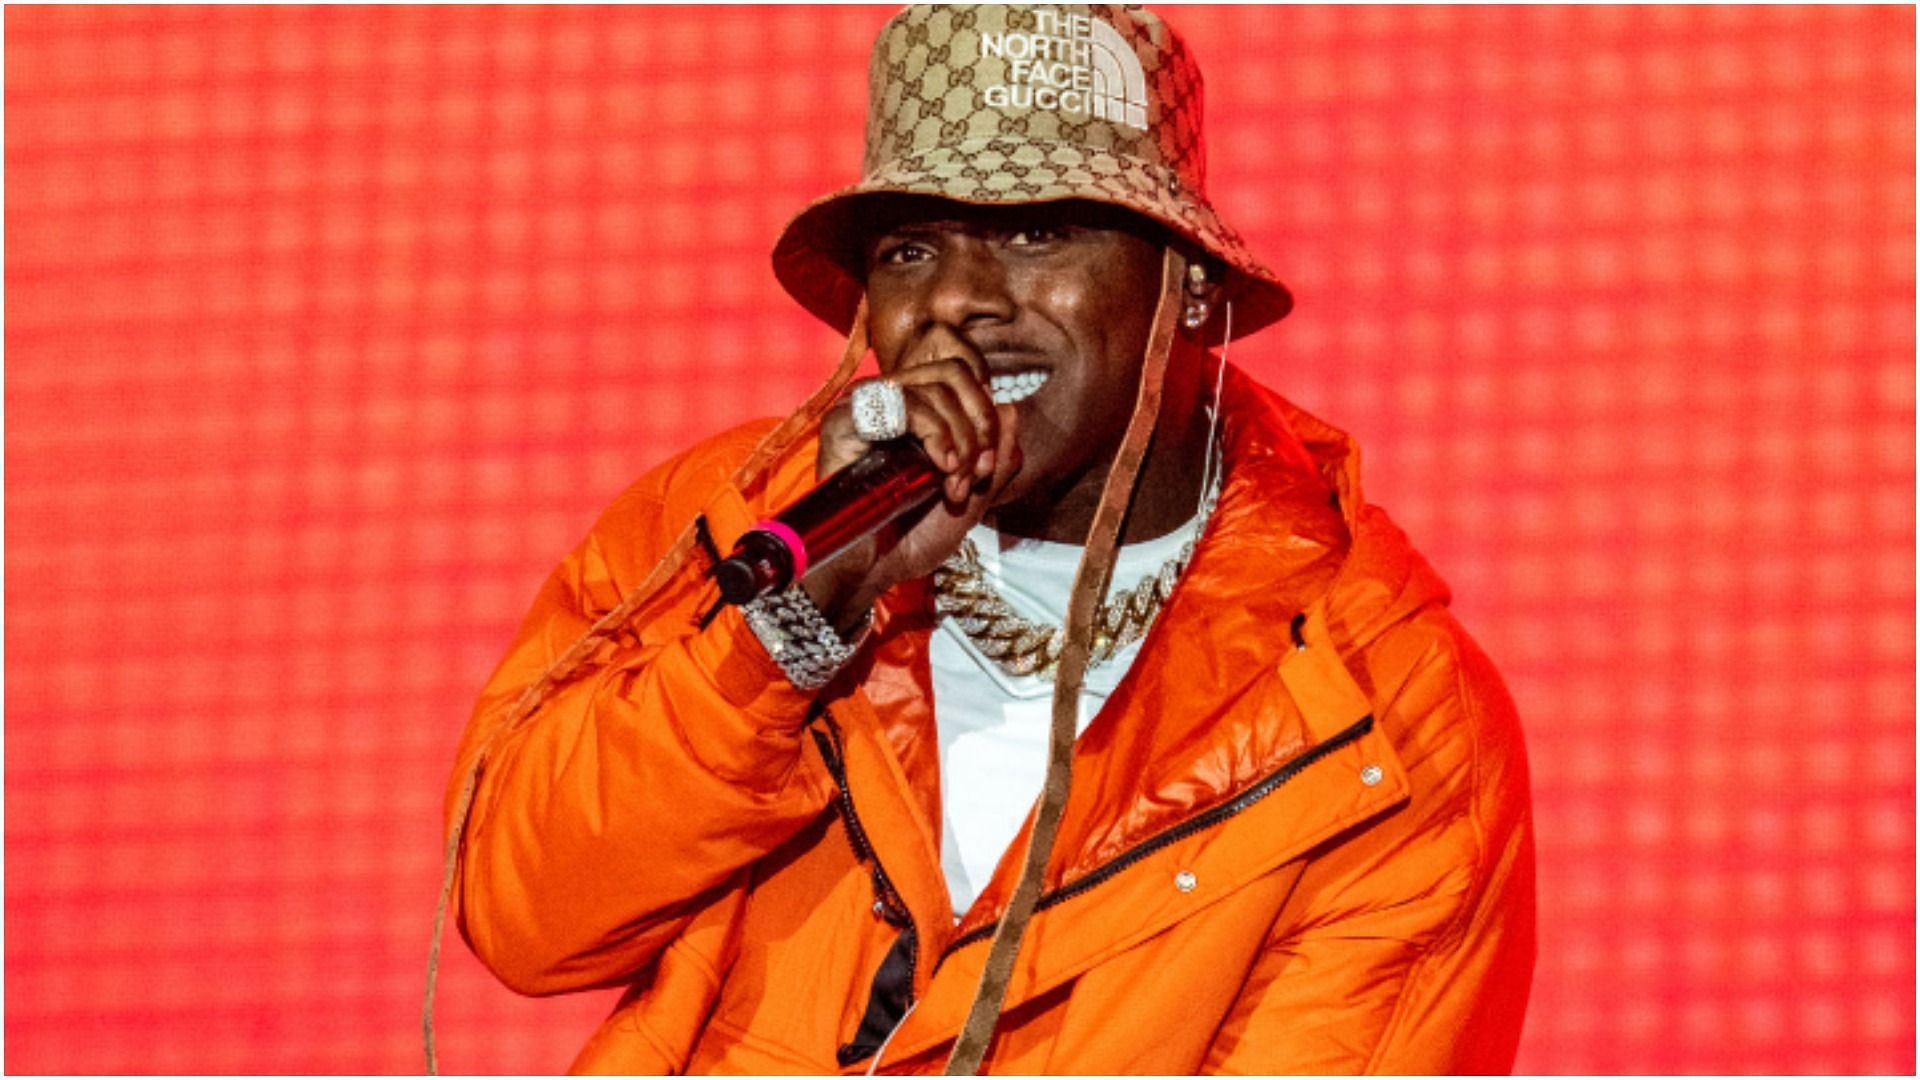 The rapper shared a video where Gary Prager can be heard shouting the N-word (Image via Timothy Norris/Getty Images)